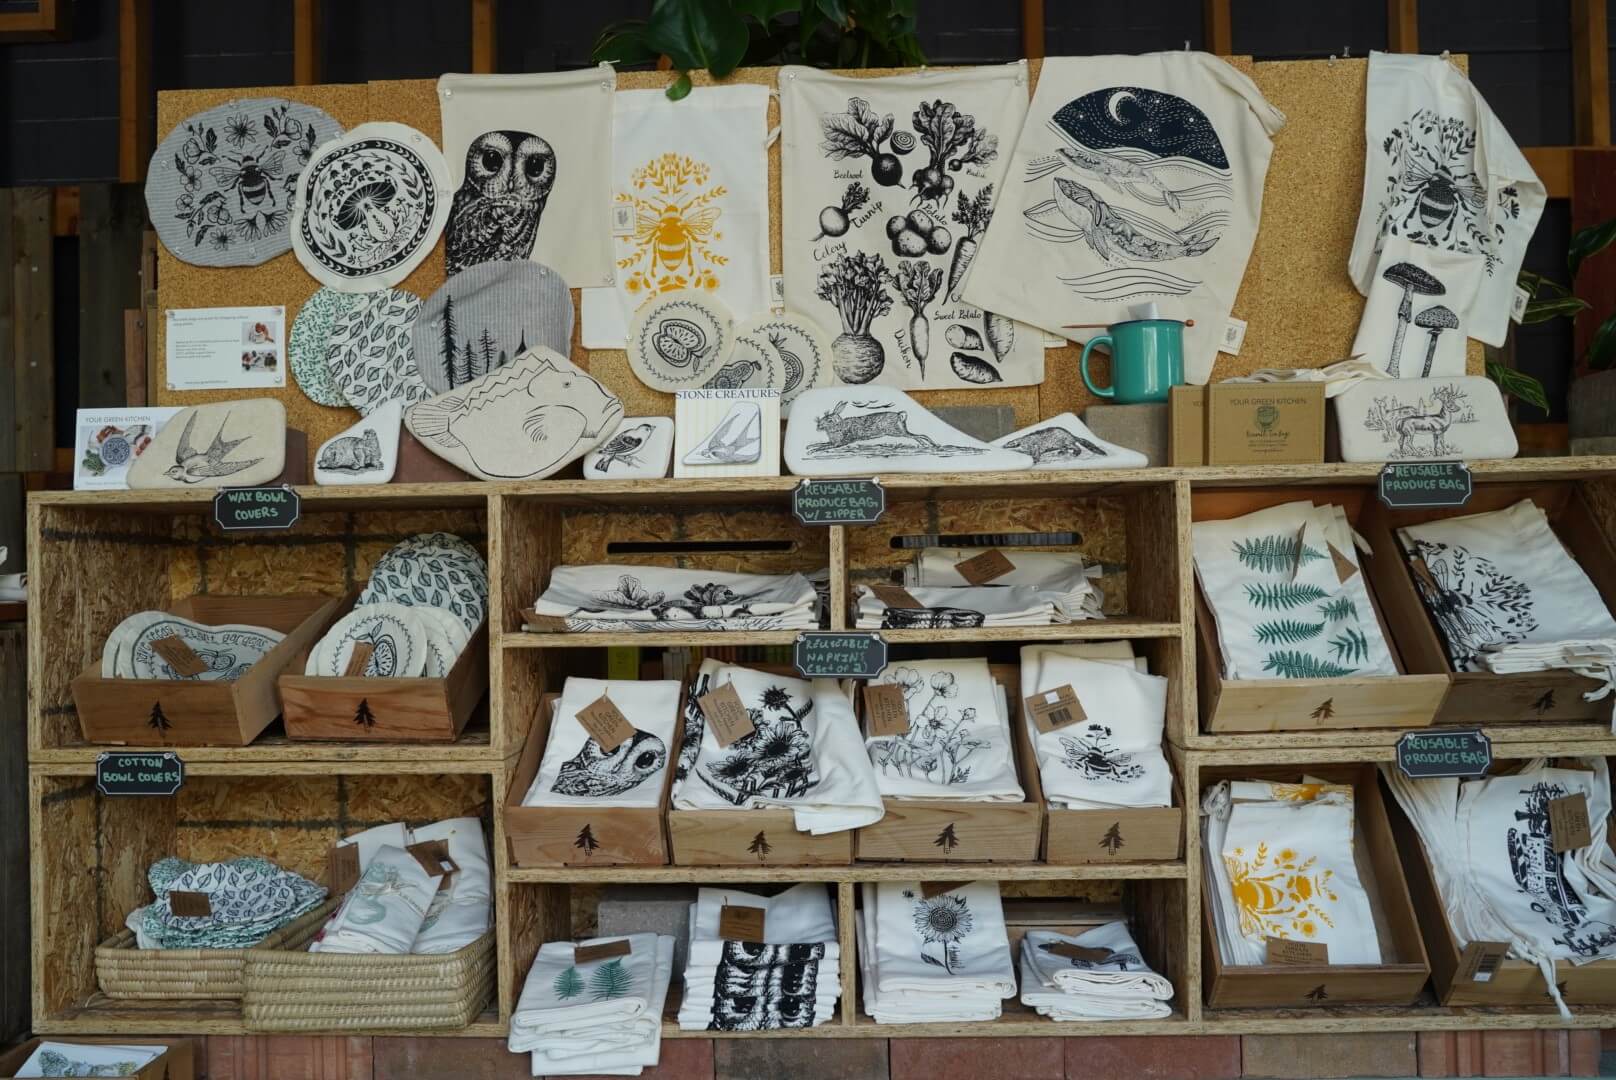 Products at the Garden Market